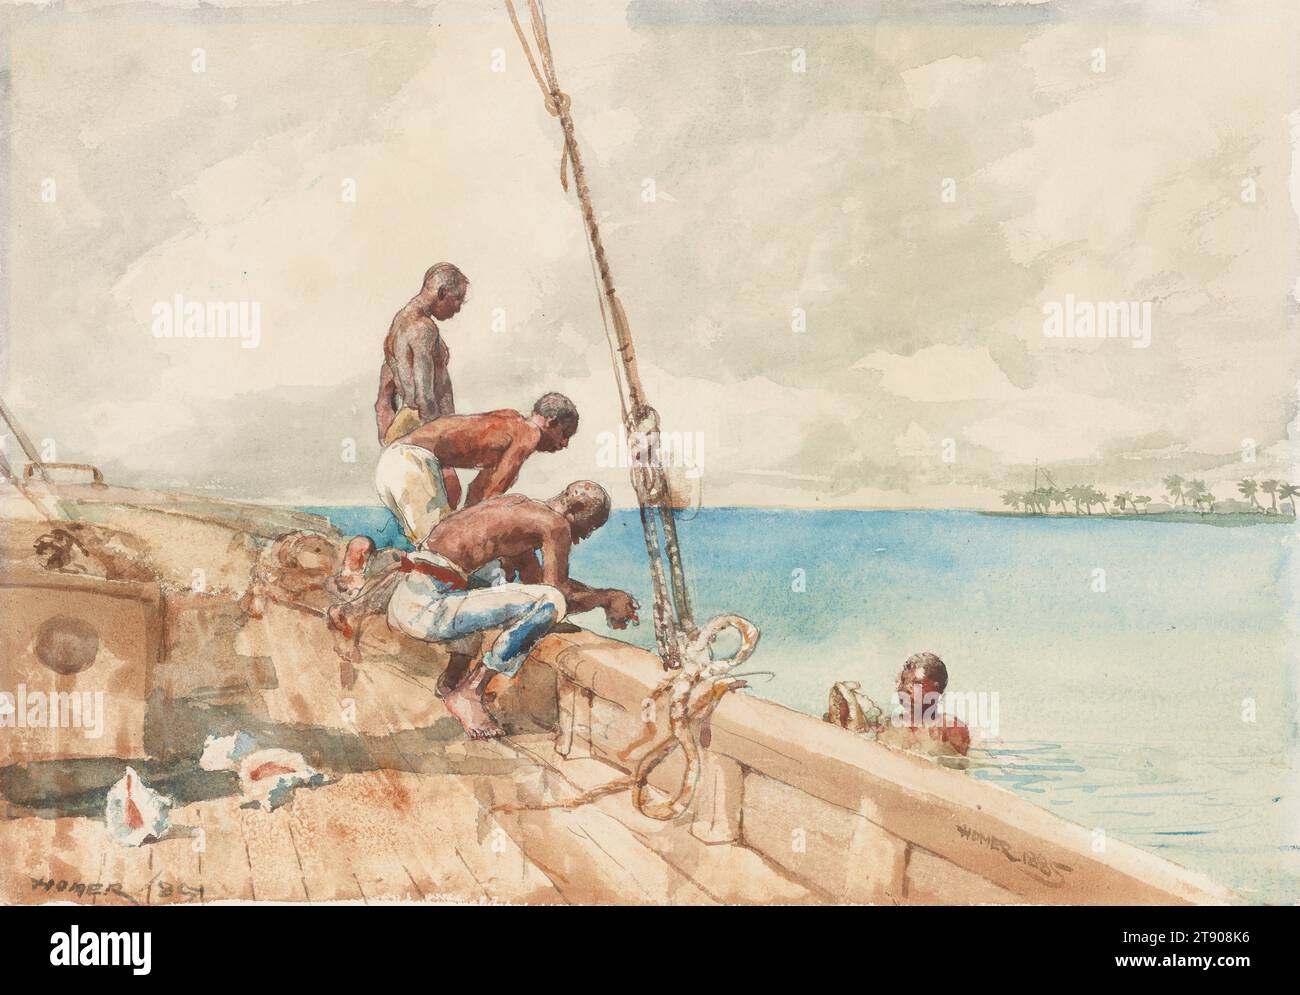 The Conch Divers, 1885, Winslow Homer, American, 1836–1910, 13 13/16 x 20 in. (35.1 x 50.8cm)23 9/16 × 29 5/8 × 1 13/16 in. (59.85 × 75.25 × 4.6 cm) (outer frame), Watercolor, blotting, lifting, and scraping, over graphite on ivory paper, United States, 19th century, The New England painter Winslow Homer accepted an assignment in 1884 from Century magazine to illustrate an article on Nassau titled 'A Midwinter Resort.' The trip inspired more than thirty watercolors, including this one. The startling intensity of the light, combined with a newcomer’s delight and an illustrator’s eye Stock Photo